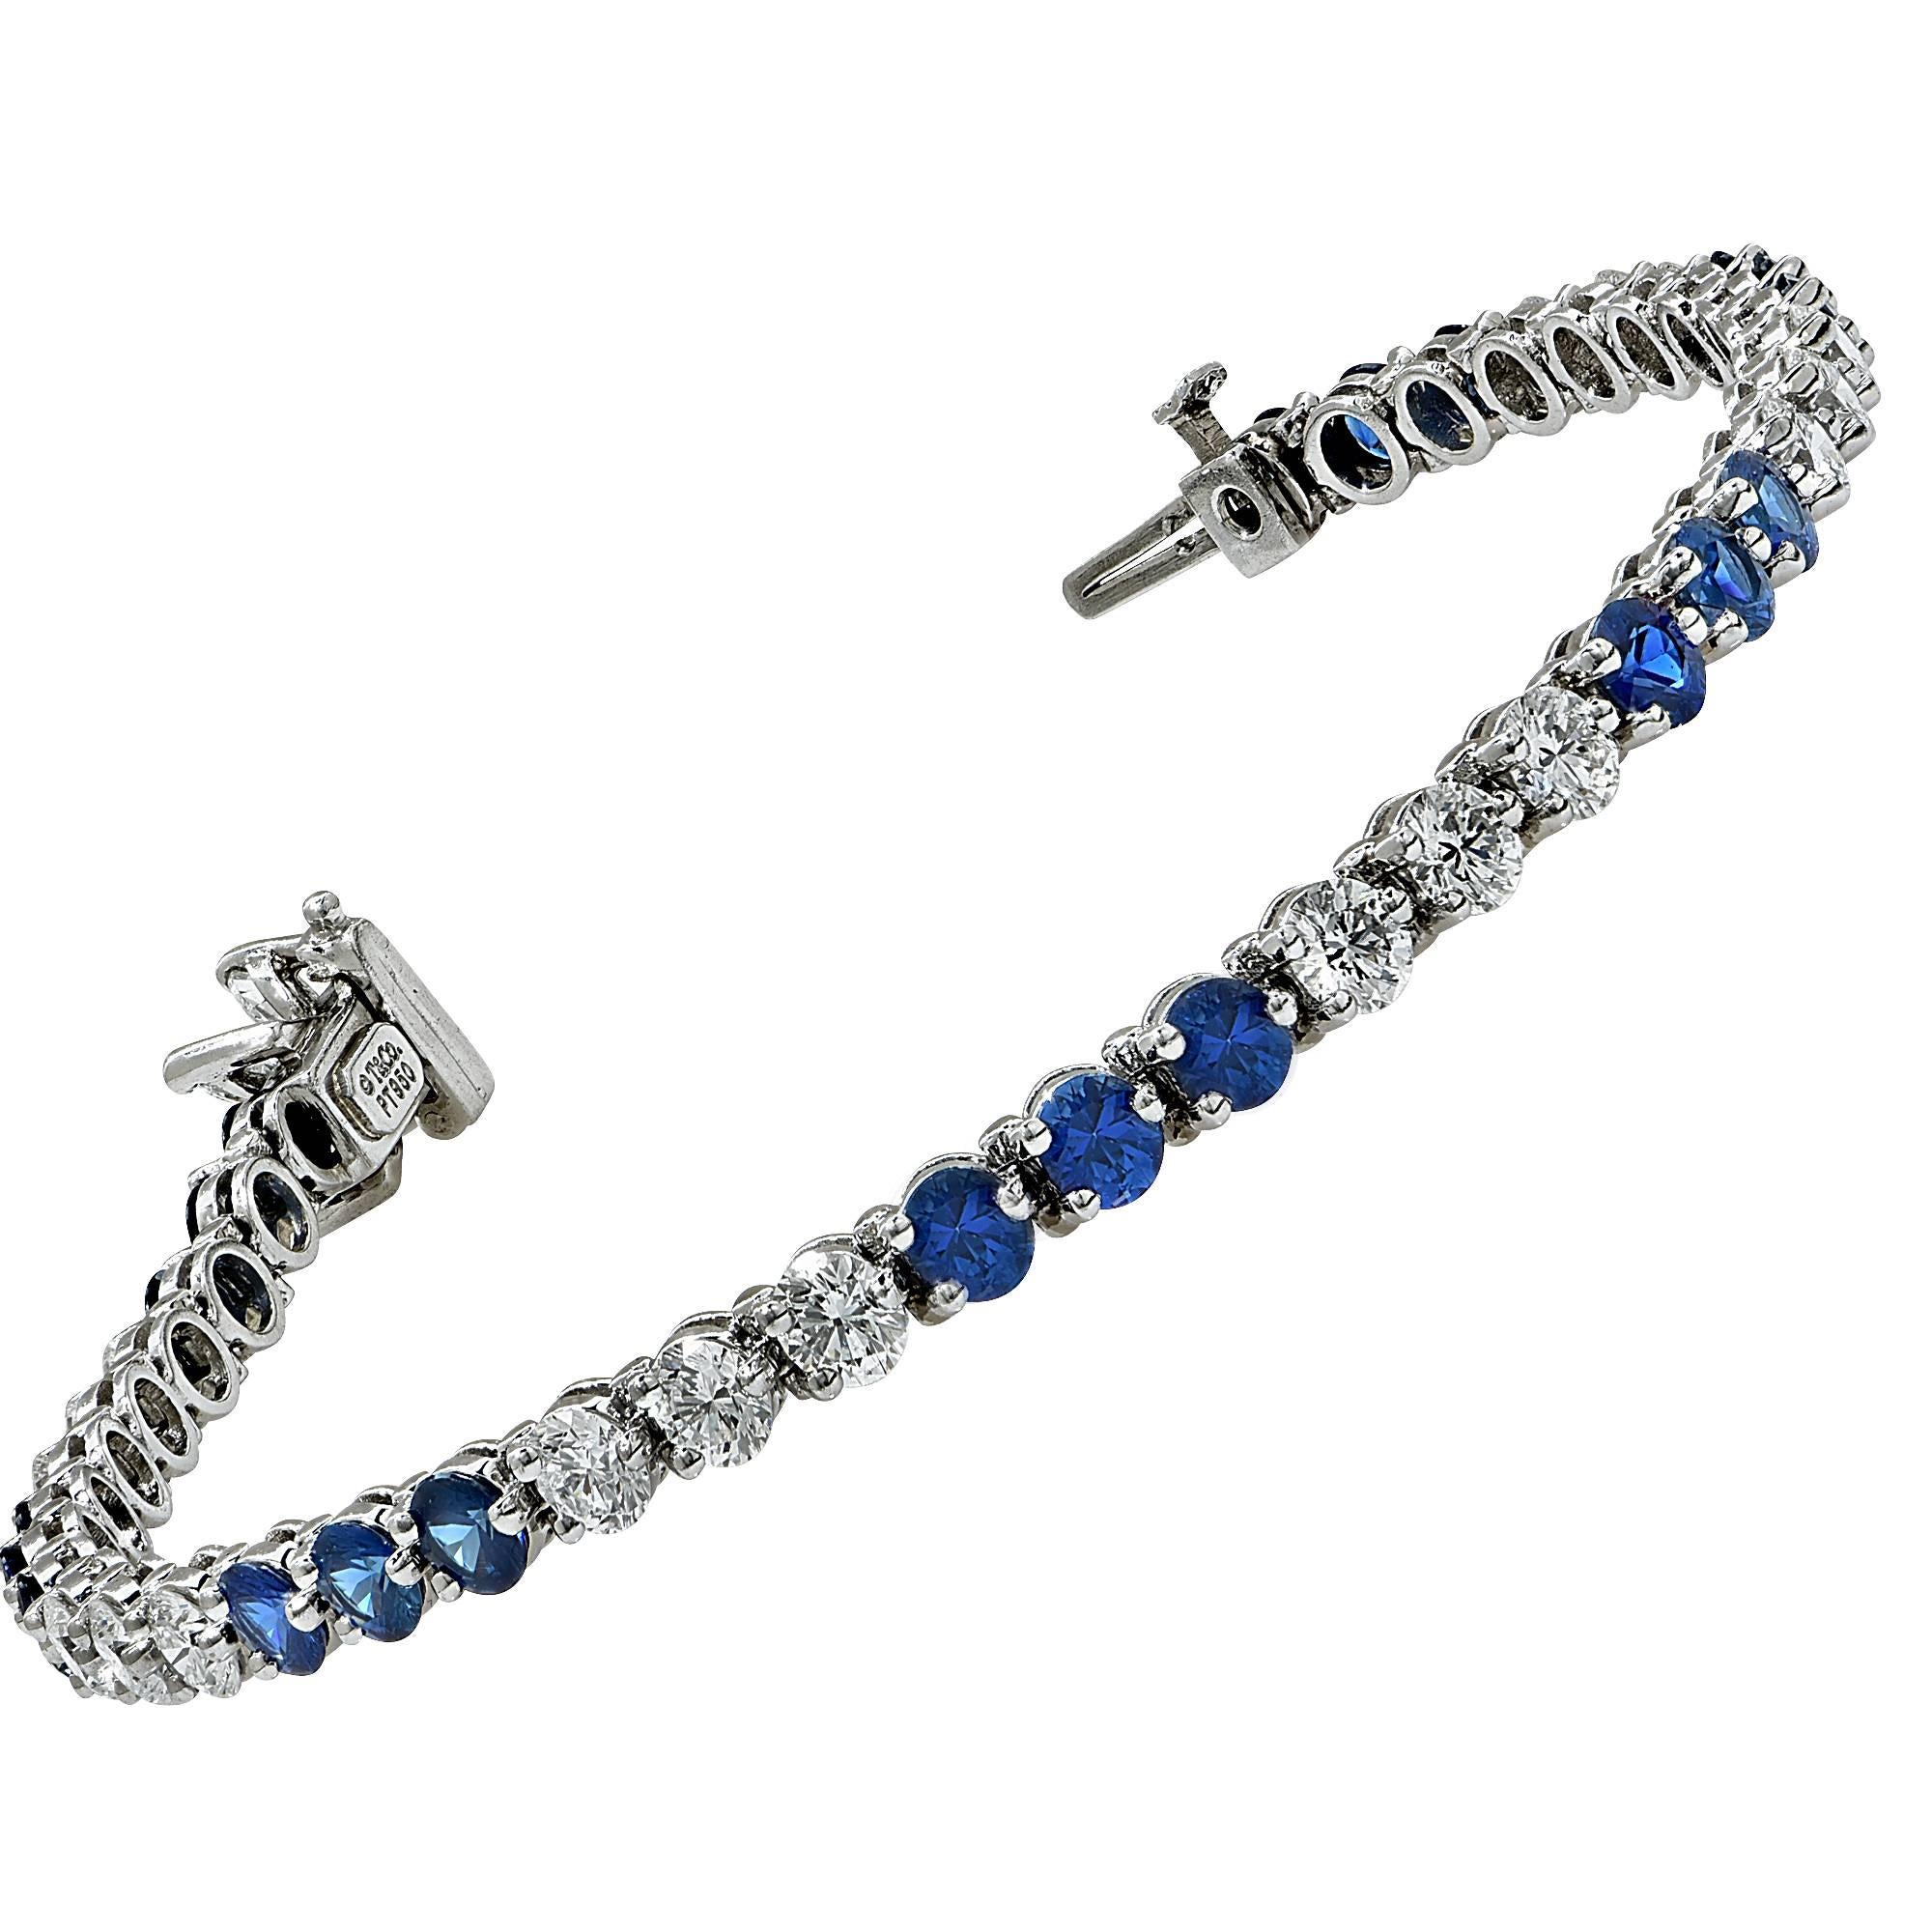 Authentic Tiffany & Co. Victoria line bracelet containing 18 Round brilliant cut diamonds weighing approximately 2.70ct F color and VVS-VS clarity and 21 vibrant round blue sapphires weighing approximately 4cts. The clasp contains 4 marquise cut